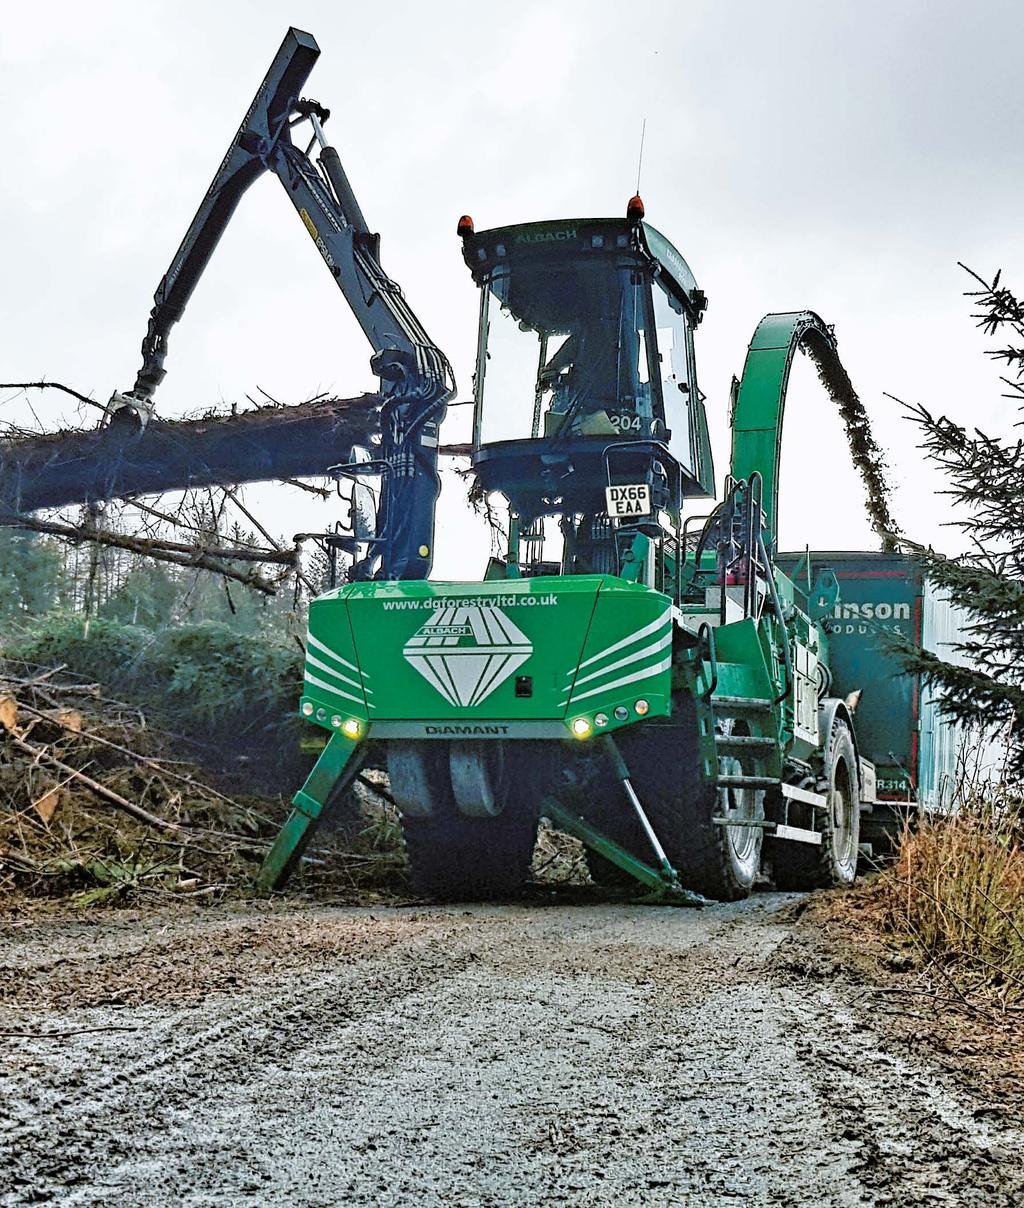 The most powerful 4-WD self-propelled whole tree chipper!